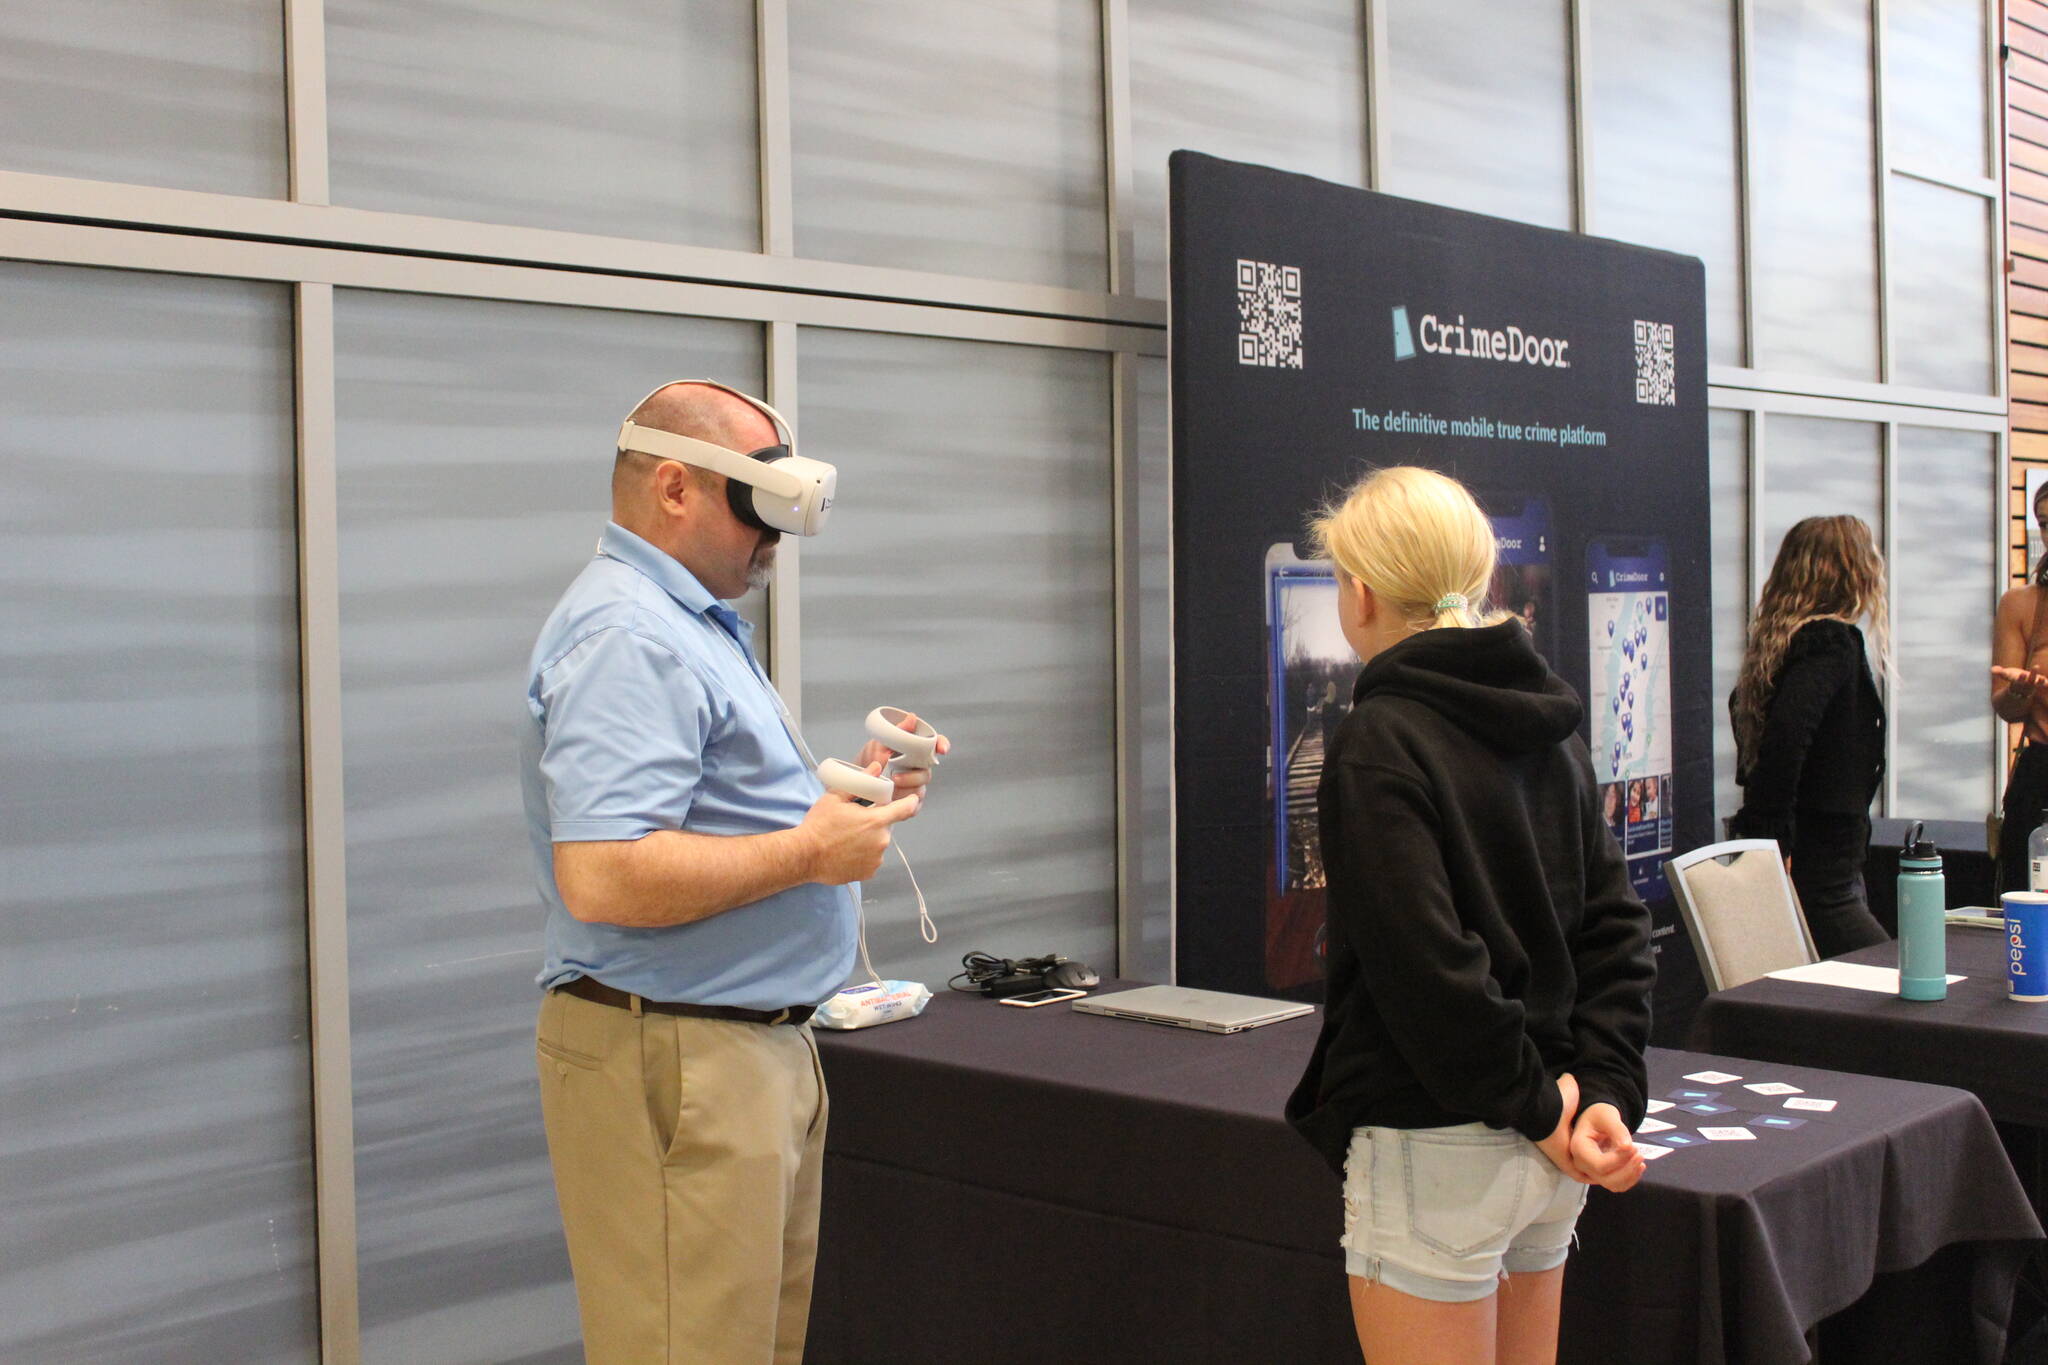 A guest is shown how to use augmented reality to explore the CrimeDoor app, a “definitive mobile true crime platform” that allows people to learn about and explore the sites and stories of true crime cases. Photo by Bailey Jo Josie/Sound Publishing